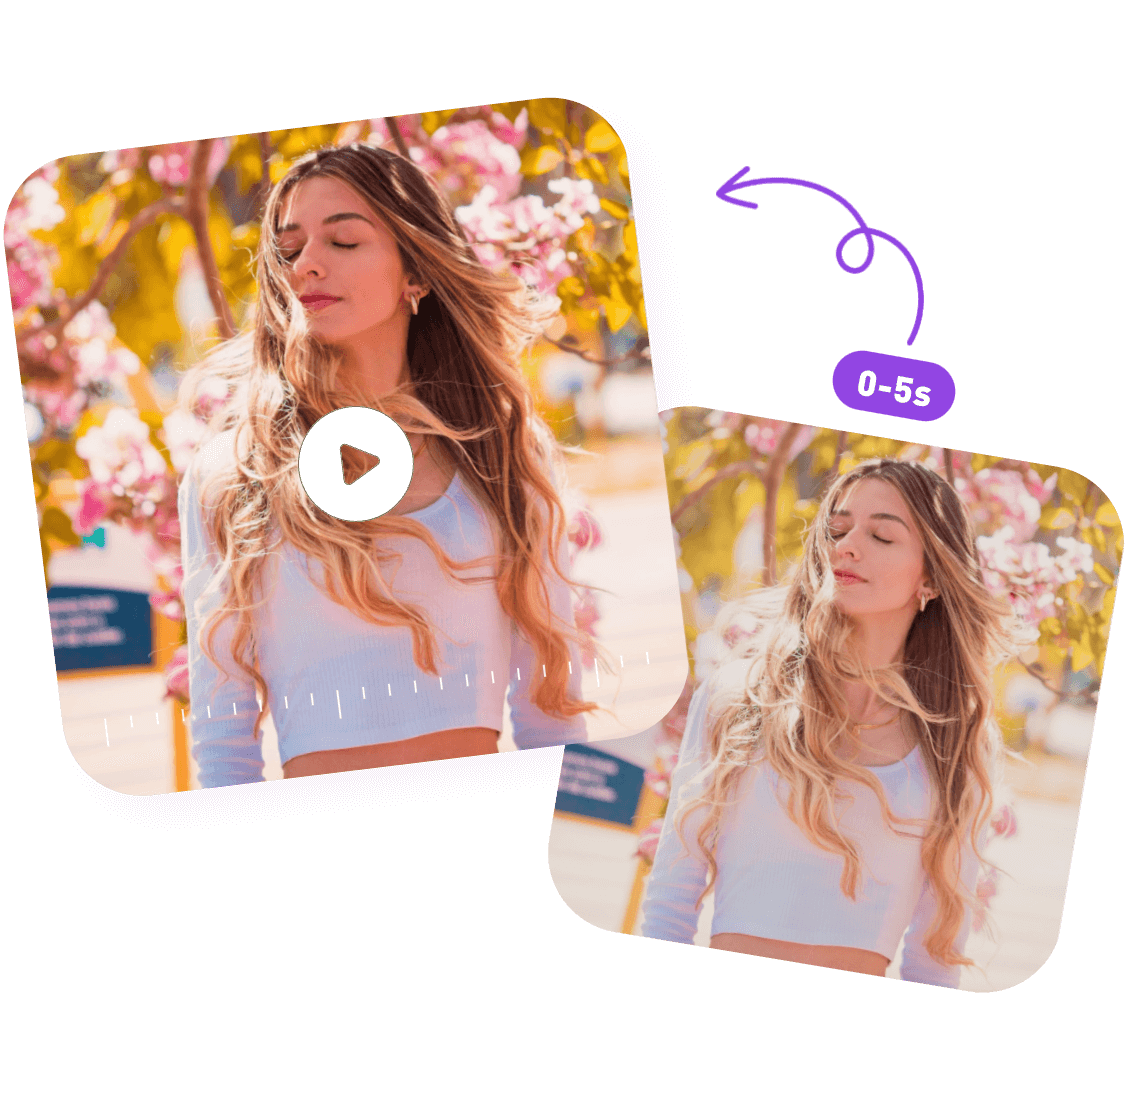 enhance the quality and color of a video featuring a beautiful woman using the Clipfly AI video enhancer